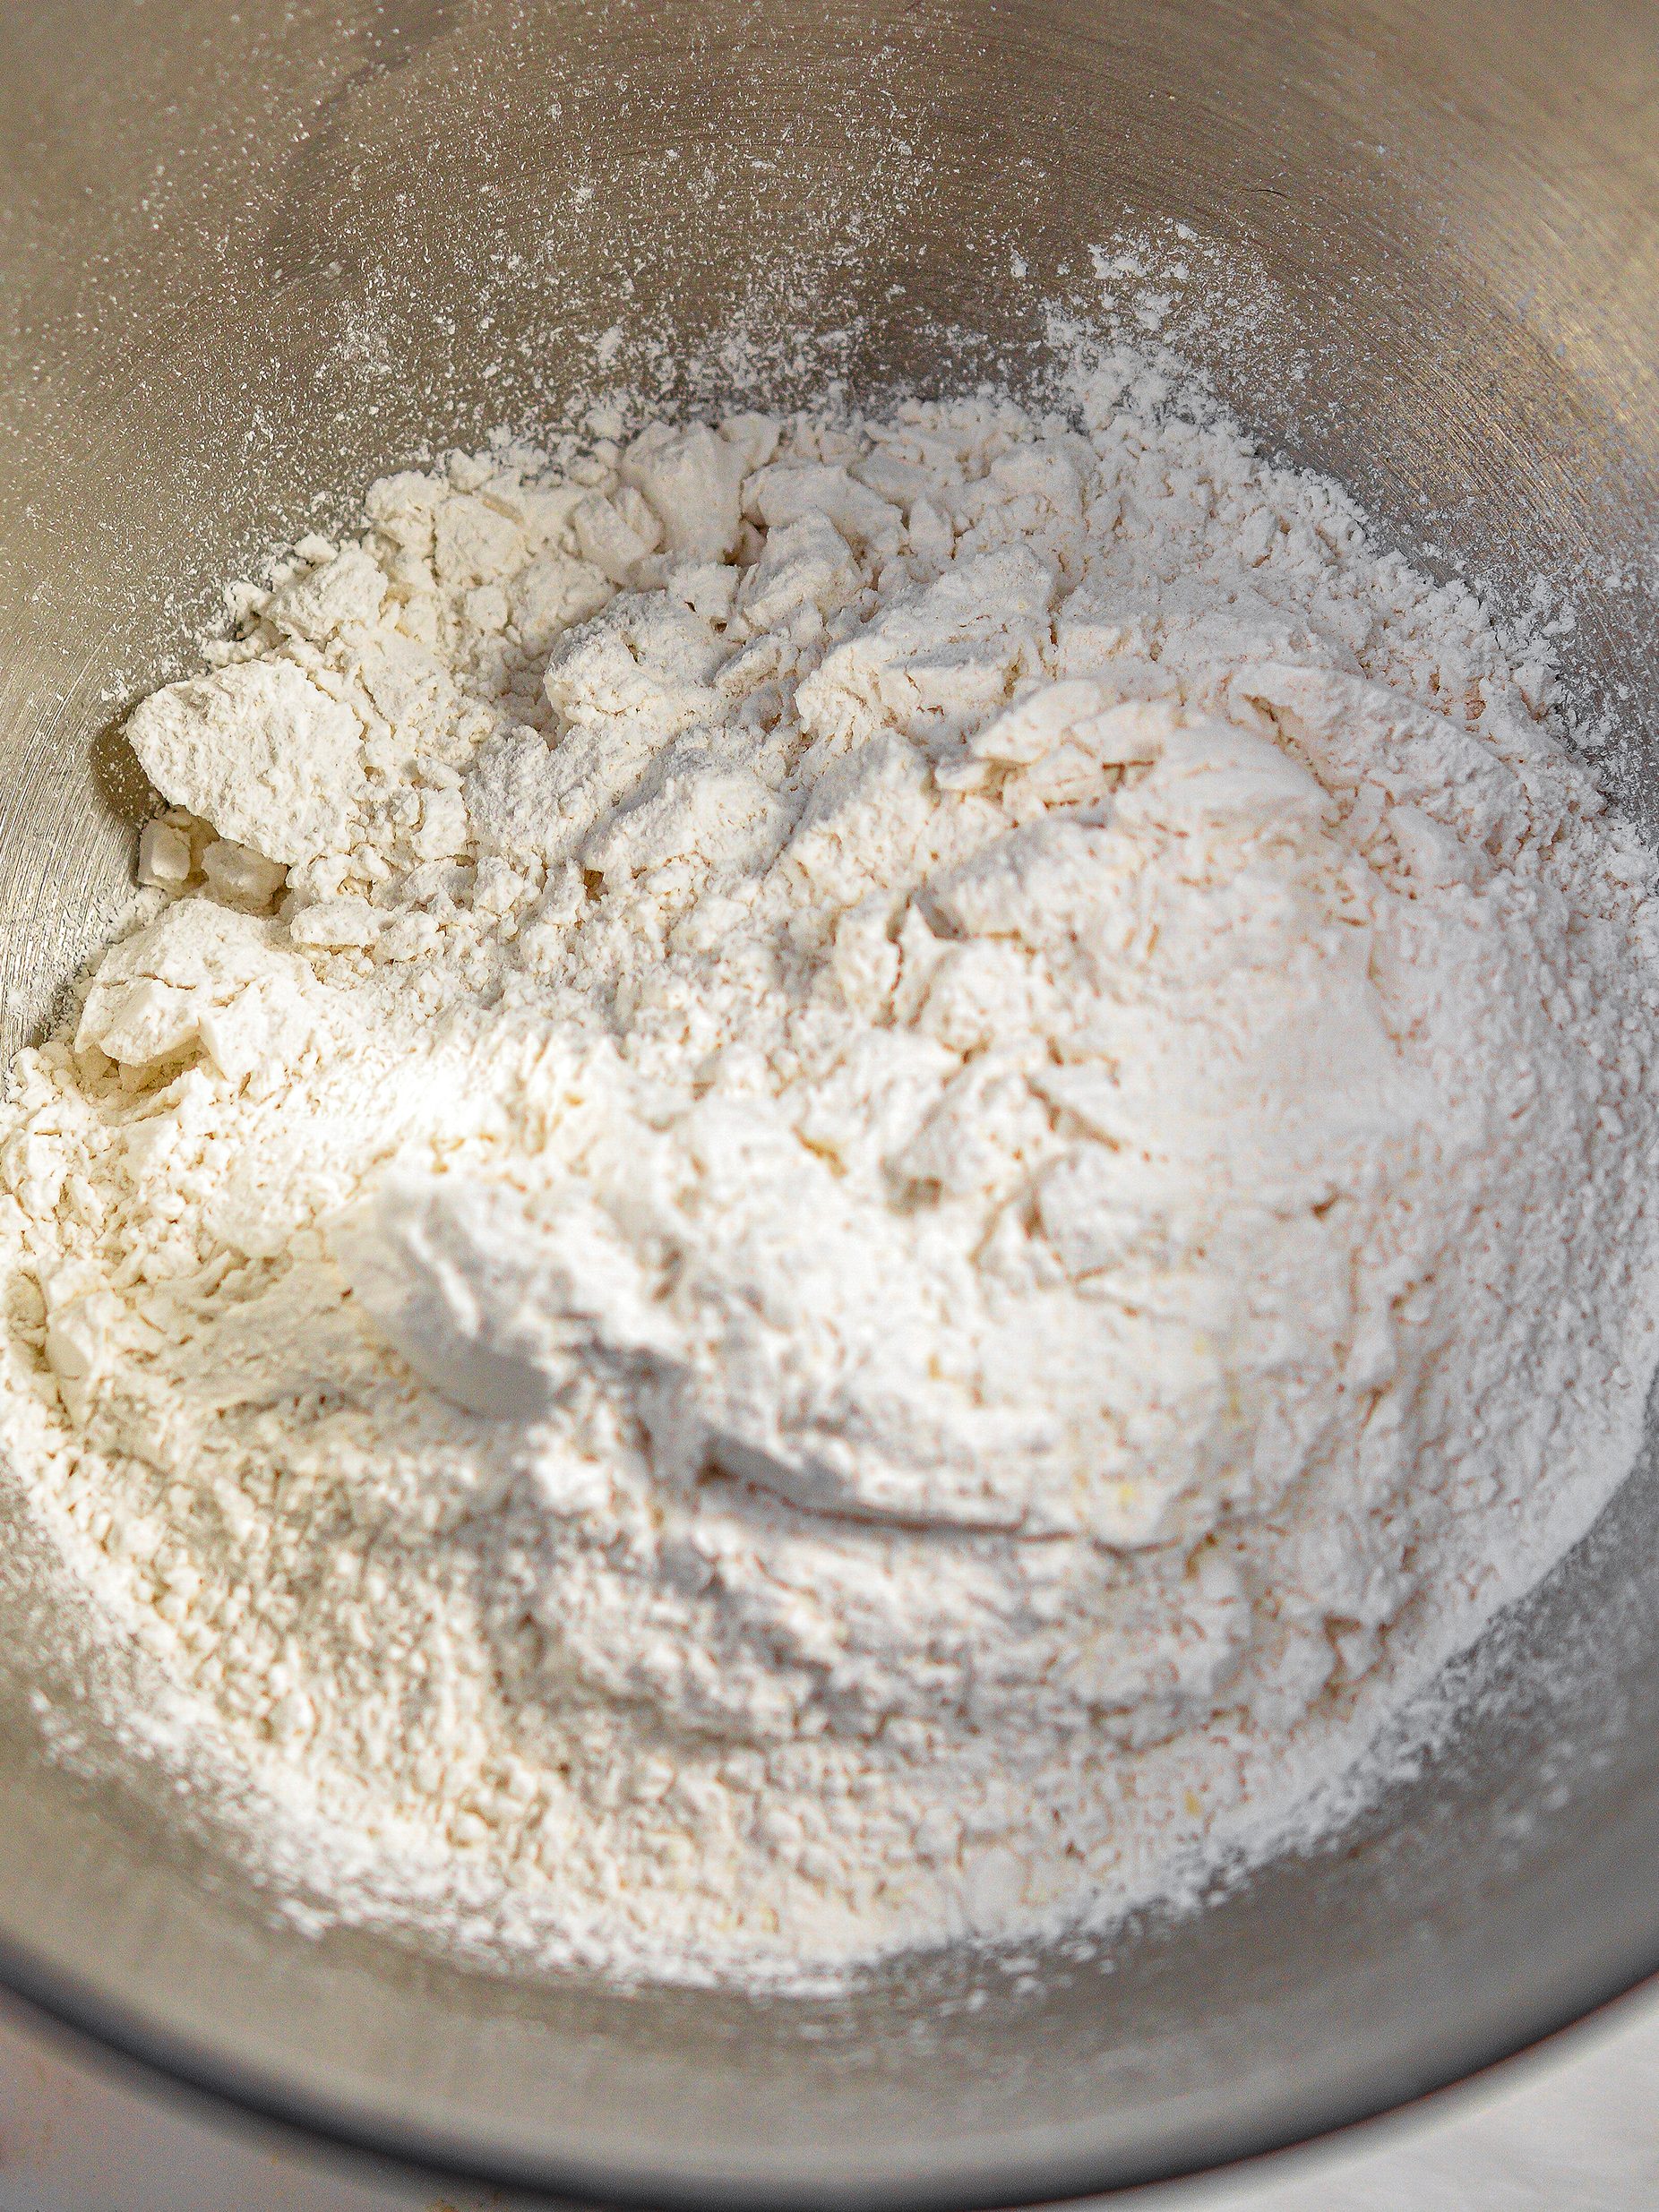 In a mixing bowl, combine 2 ¼ cups of the flour, yeast, ¼ cup sugar and 1 tsp. ½ tsp. Salt.